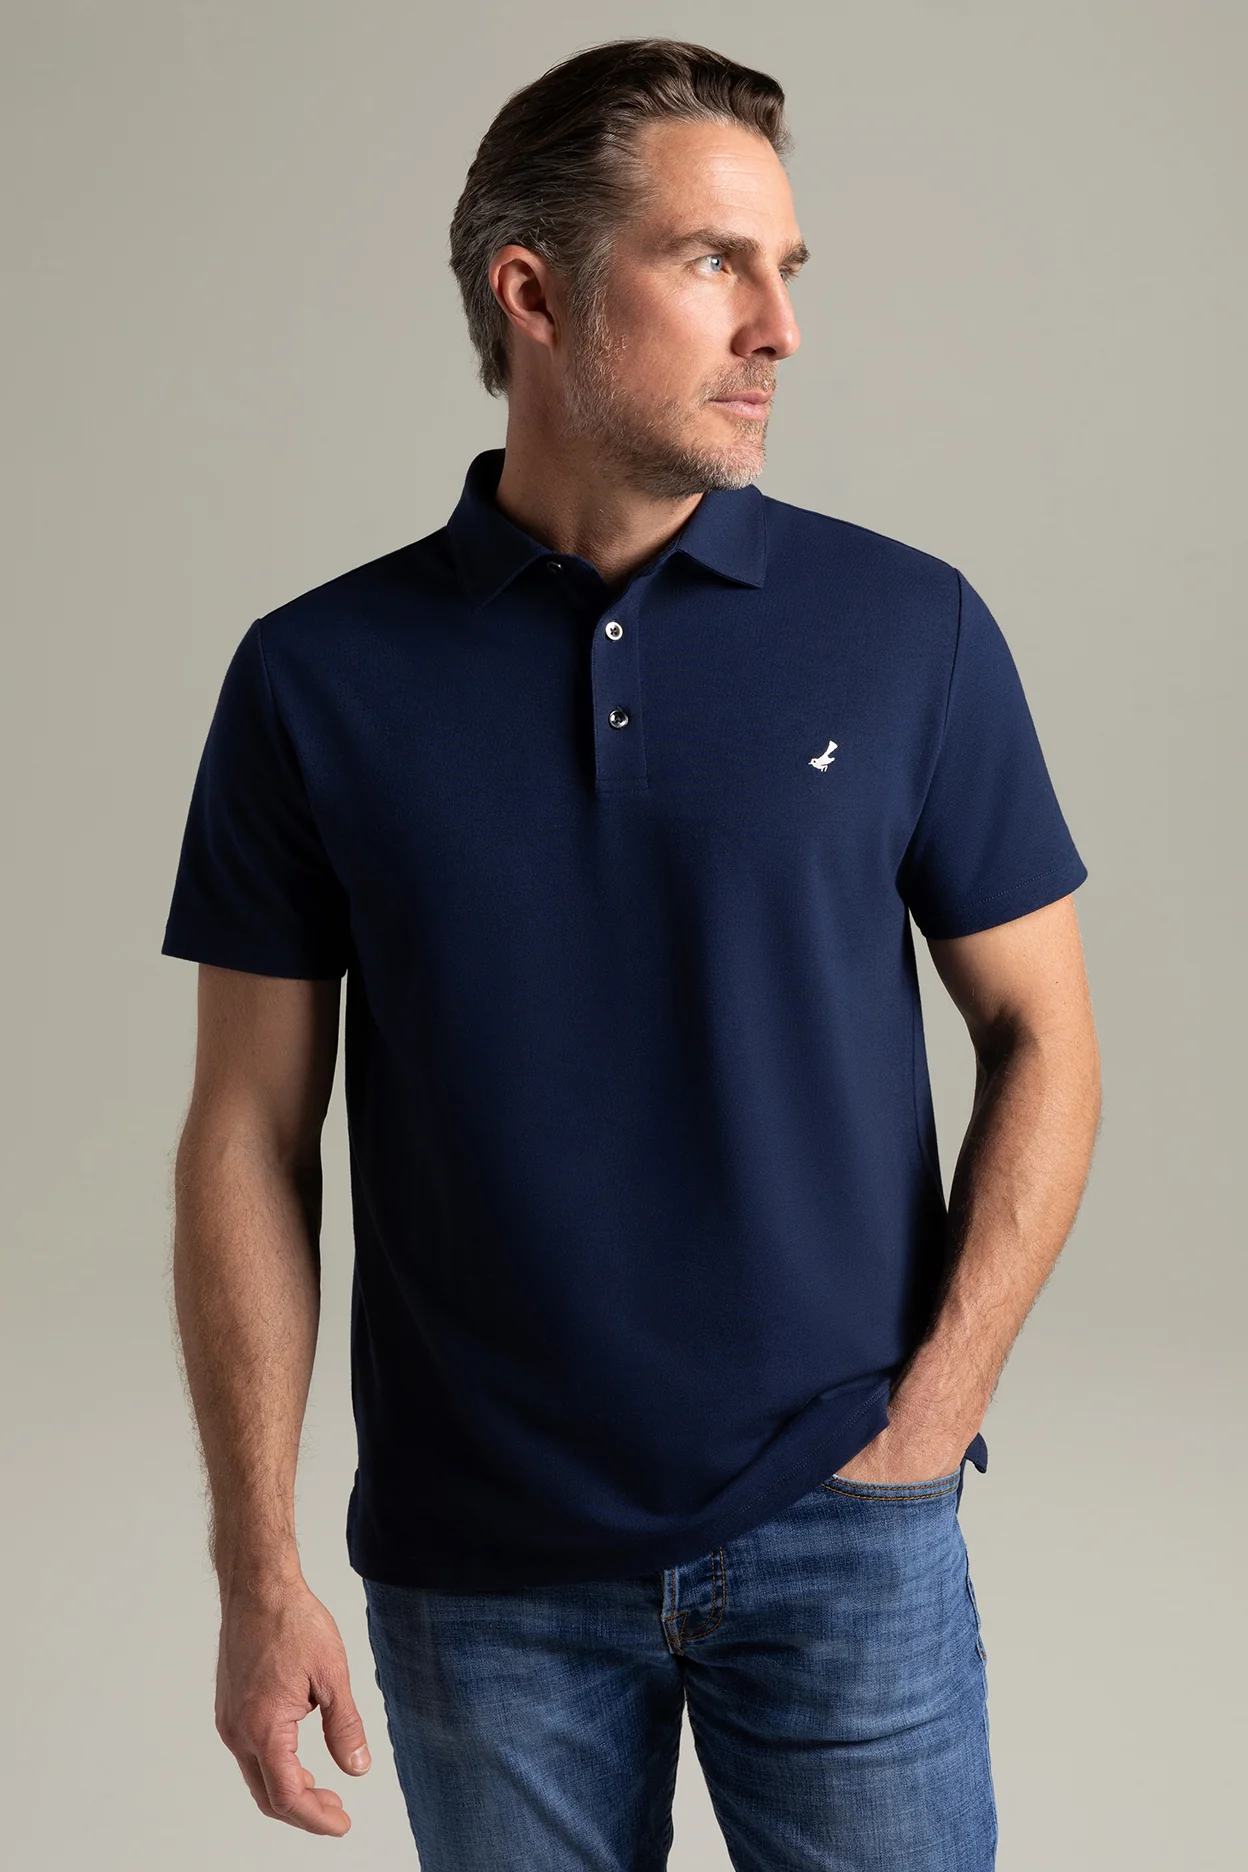 HyperNatural + El Capitán Classic Fit Micro-Pique Polo with Hyper-Cool Jade